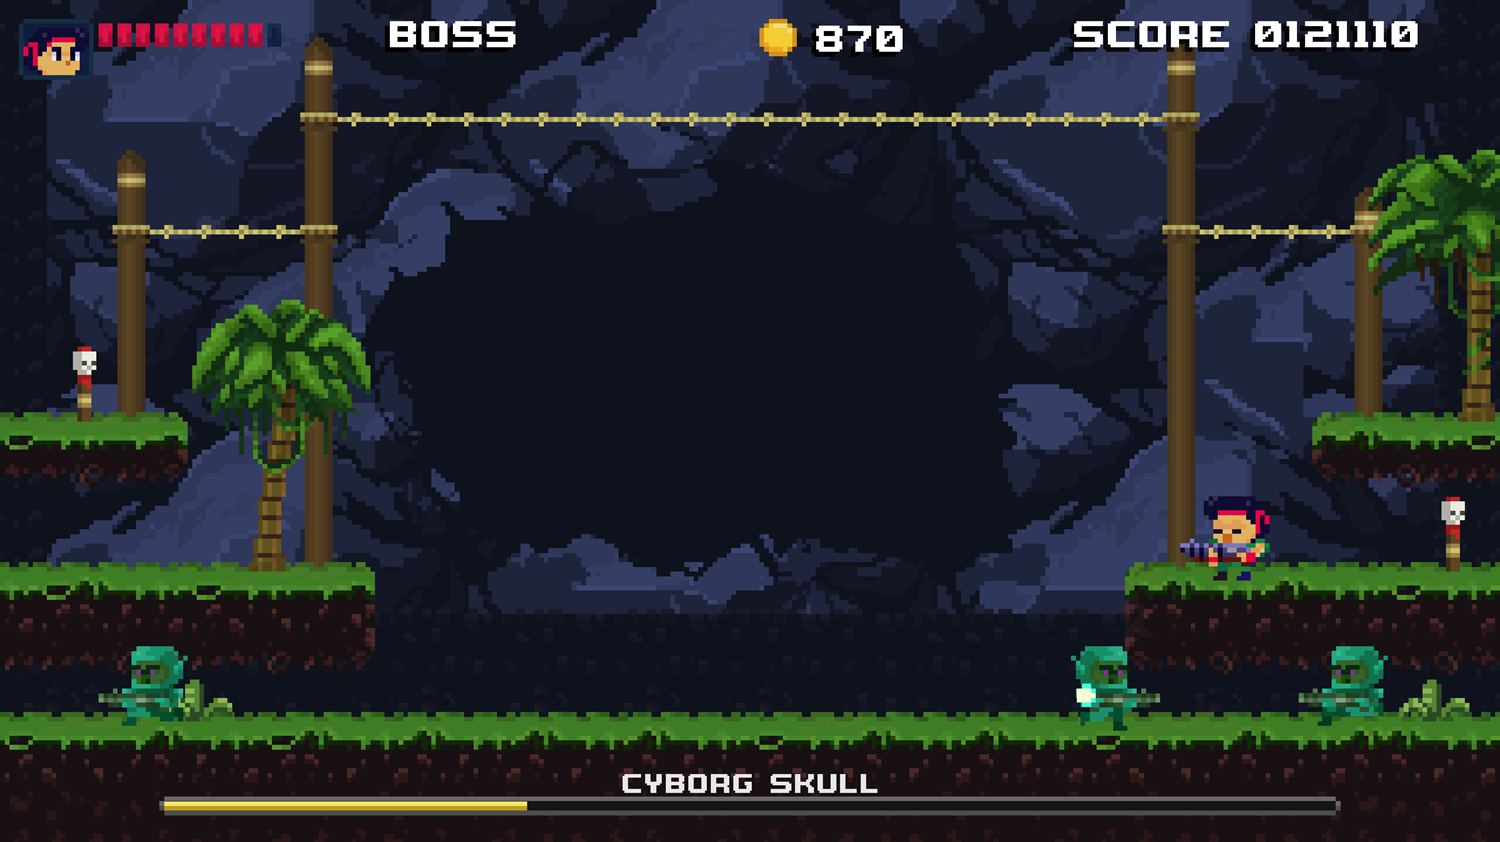 Brave Soldier Invasion of Cyborgs Game Final Level Screenshot.